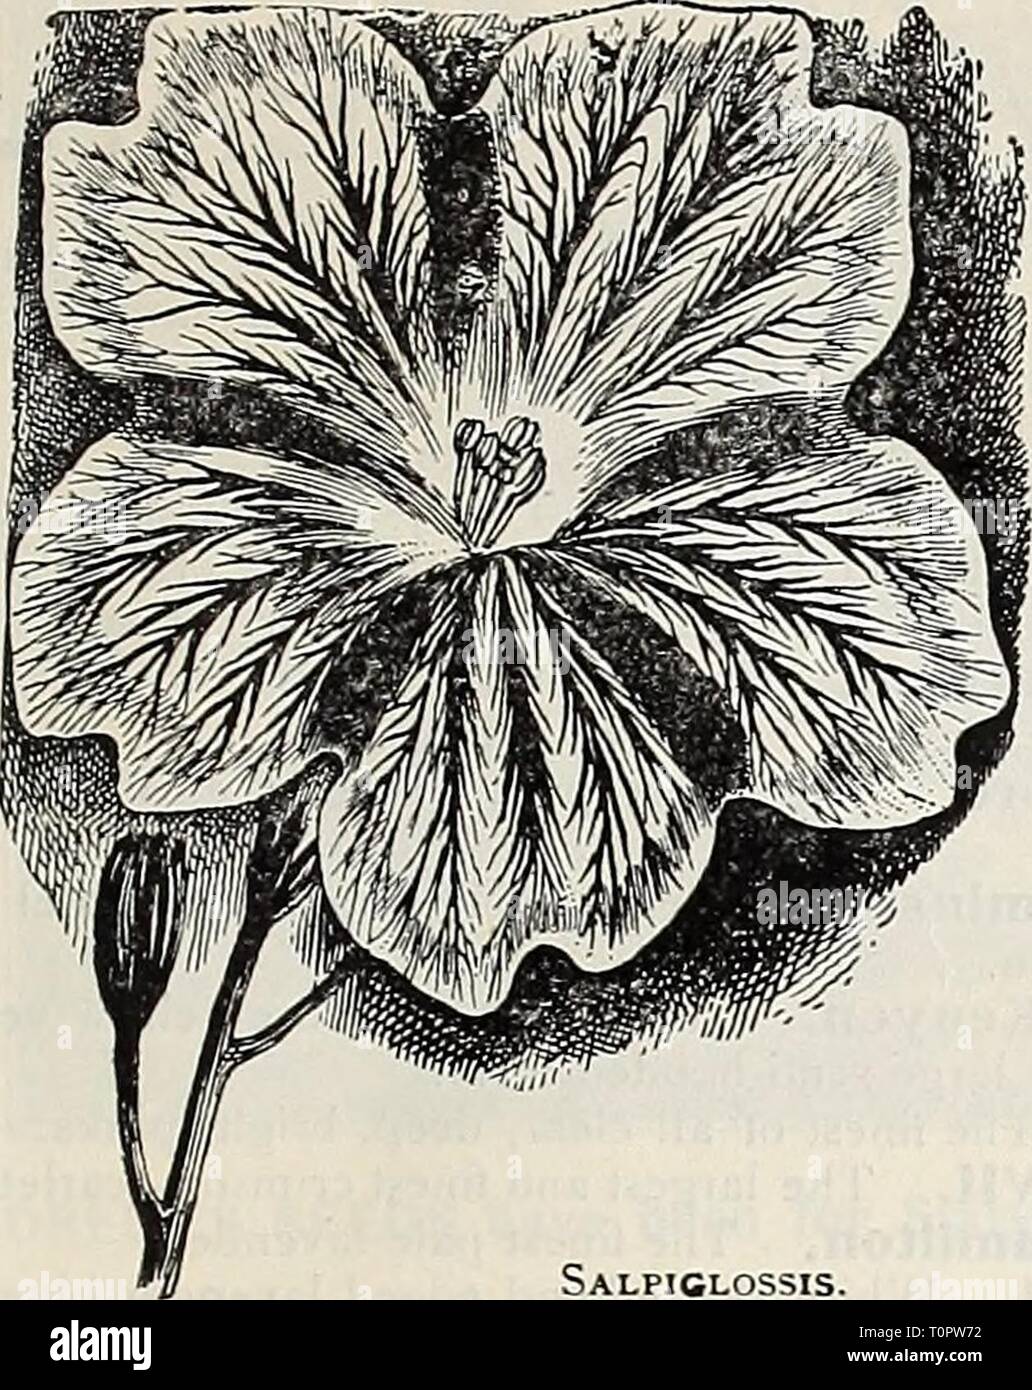 Dreer's garden book  1906 Dreer's garden book : 1906  dreersgardenbook1906henr Year: 1906  Dreer's Improved Large-floiivering Salpiglossis. (Painted Tongue.) Shown ill colors on the front covar of iJtis book. These are one uf the very tinest annuals, and we hope the prominence which we give them this season will result in their being more generally grown. They are of the easiest culture, succeeding in any sunny position. The plants grow  to 2 feet high and produce freely, from midsummer till frost, their attractive orchid-like flow- ers in a very large range of colors, including many shades  Stock Photo